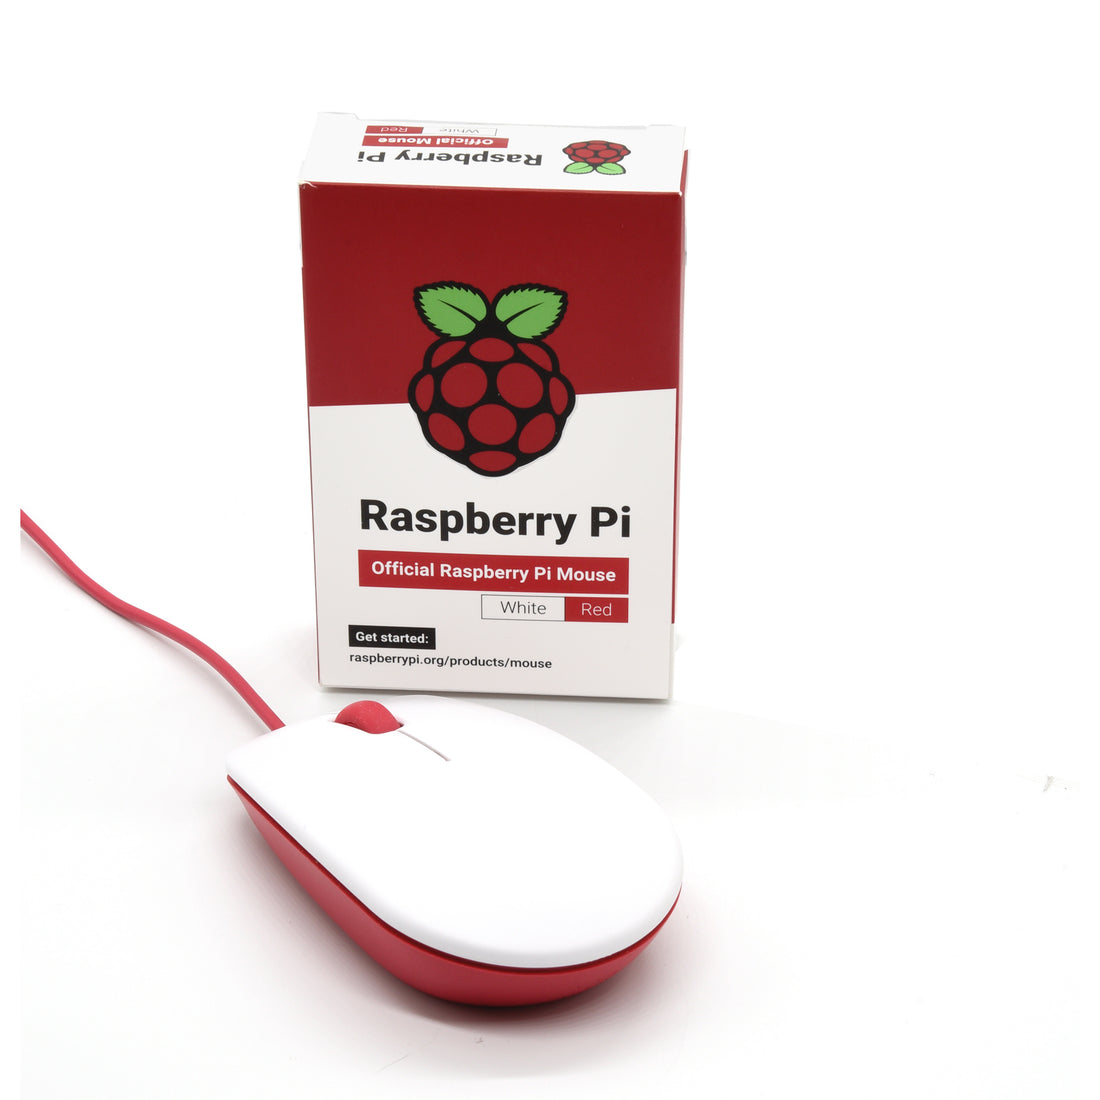 PepperTech Digital Raspberry Pi 400 Essentials Value Pack – Includes Power Supply, HDMI Cable, Mouse, and 32GB SD Card Pre-loaded with Raspberry Pi OS